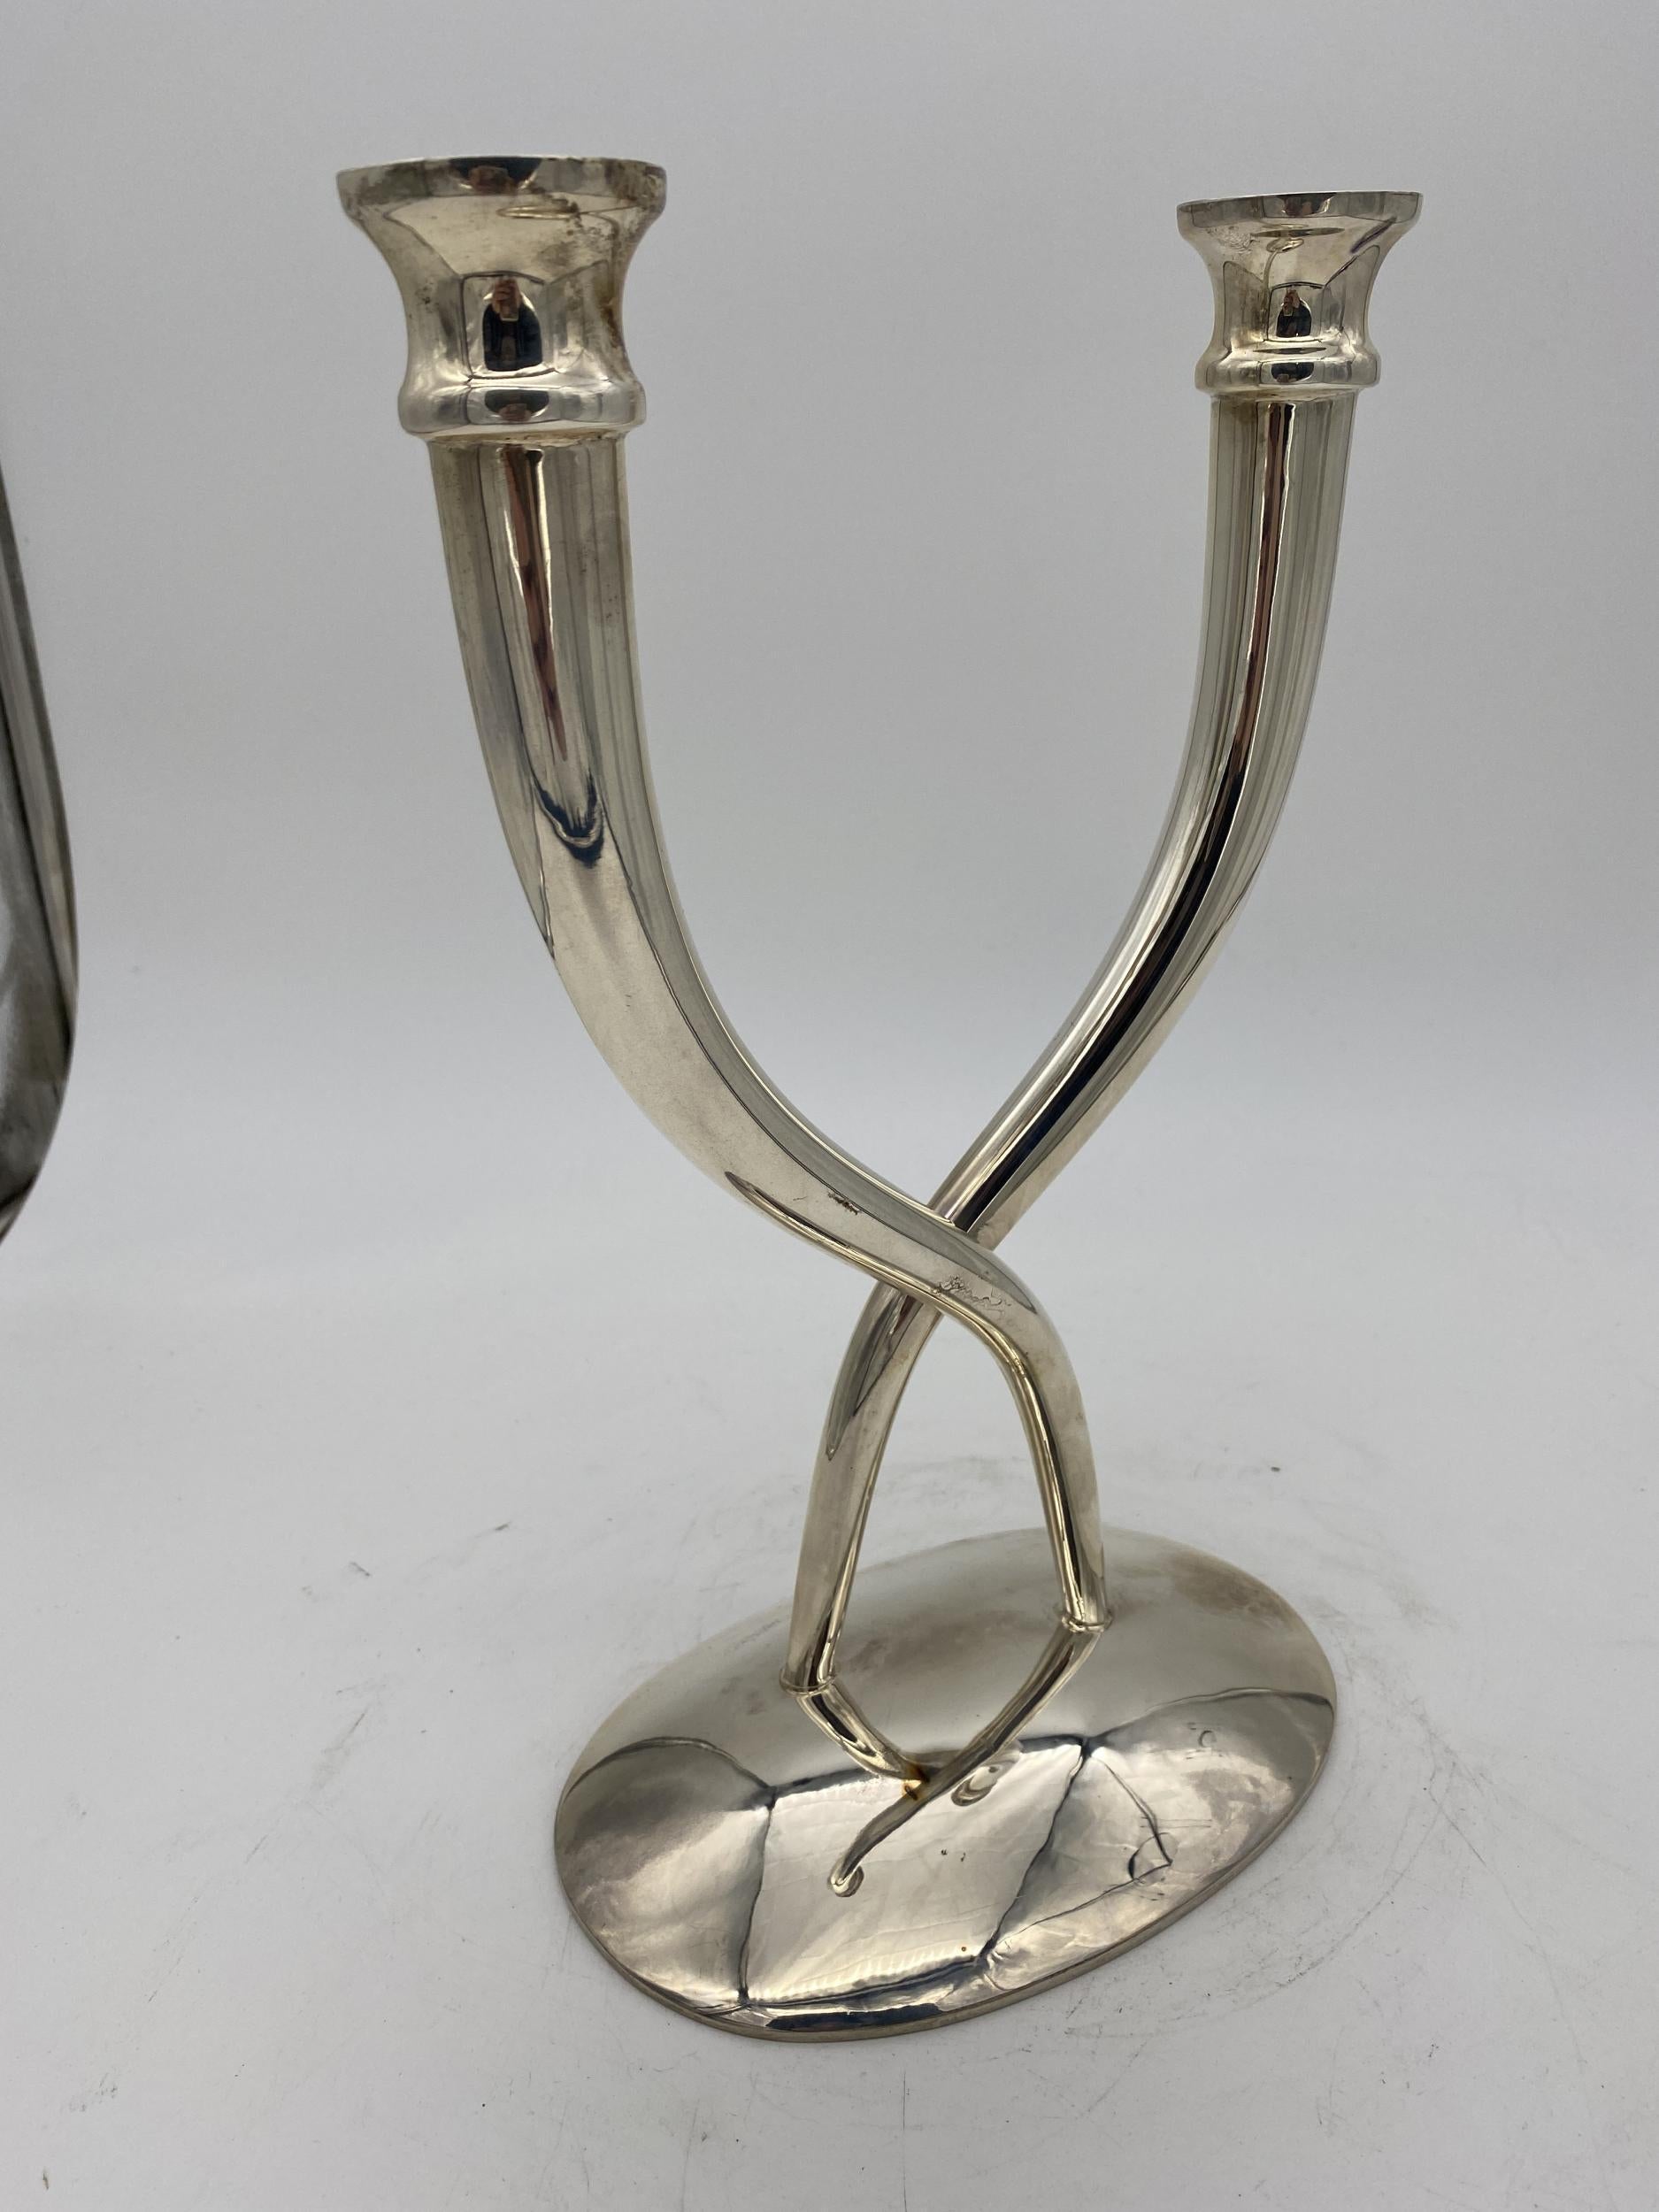 Late 20th century sterling silver candle holder pair featuring 2 double arms on each holder with free-form base.

Stamped: Sterling silver villa
Circa 1980

Candle stick: 12.5